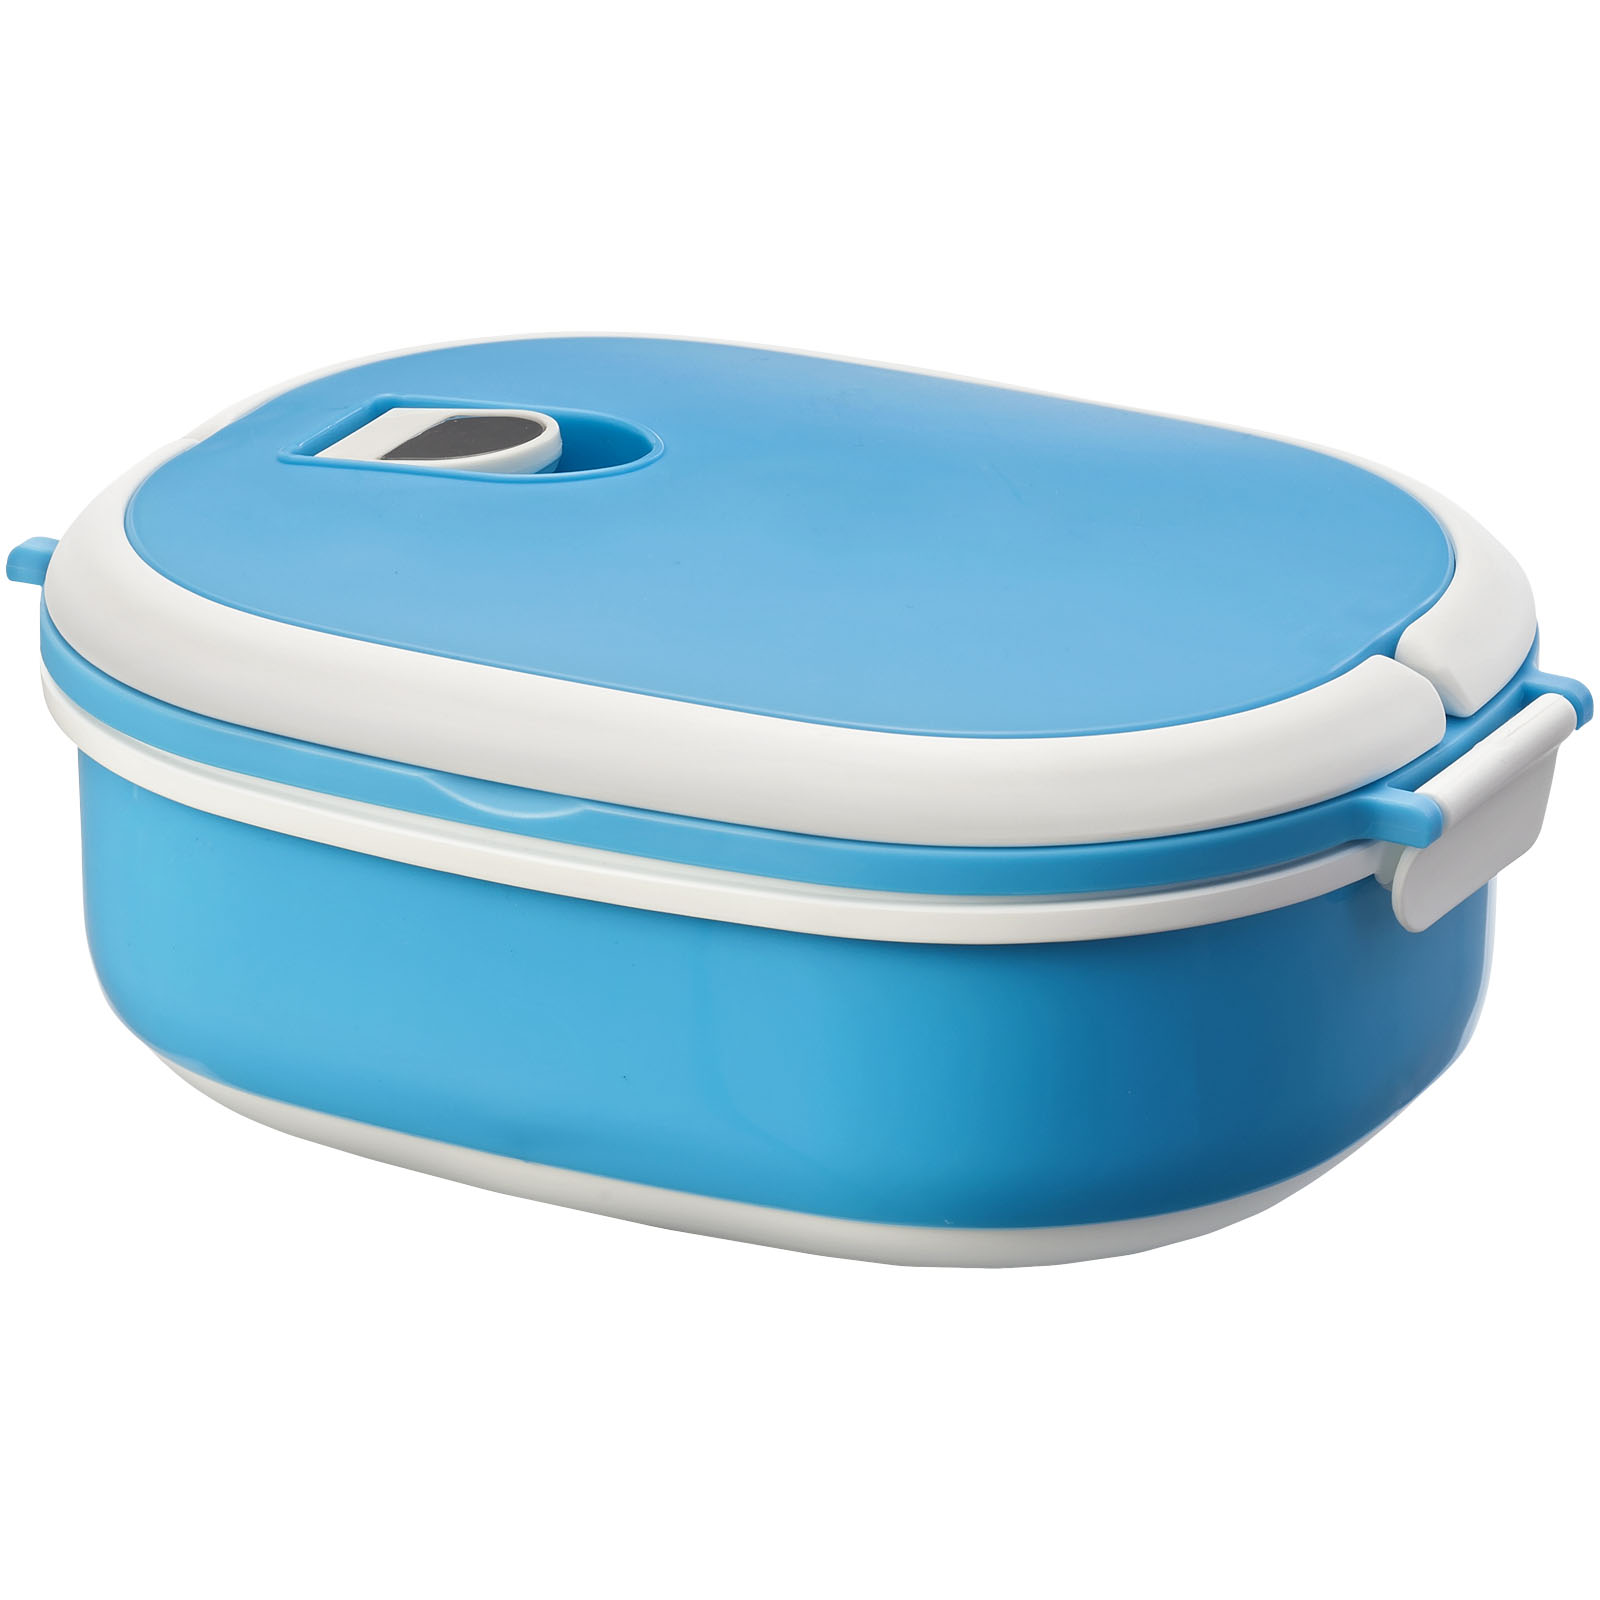 Lunch Boxes - Spiga 750 ml lunch box